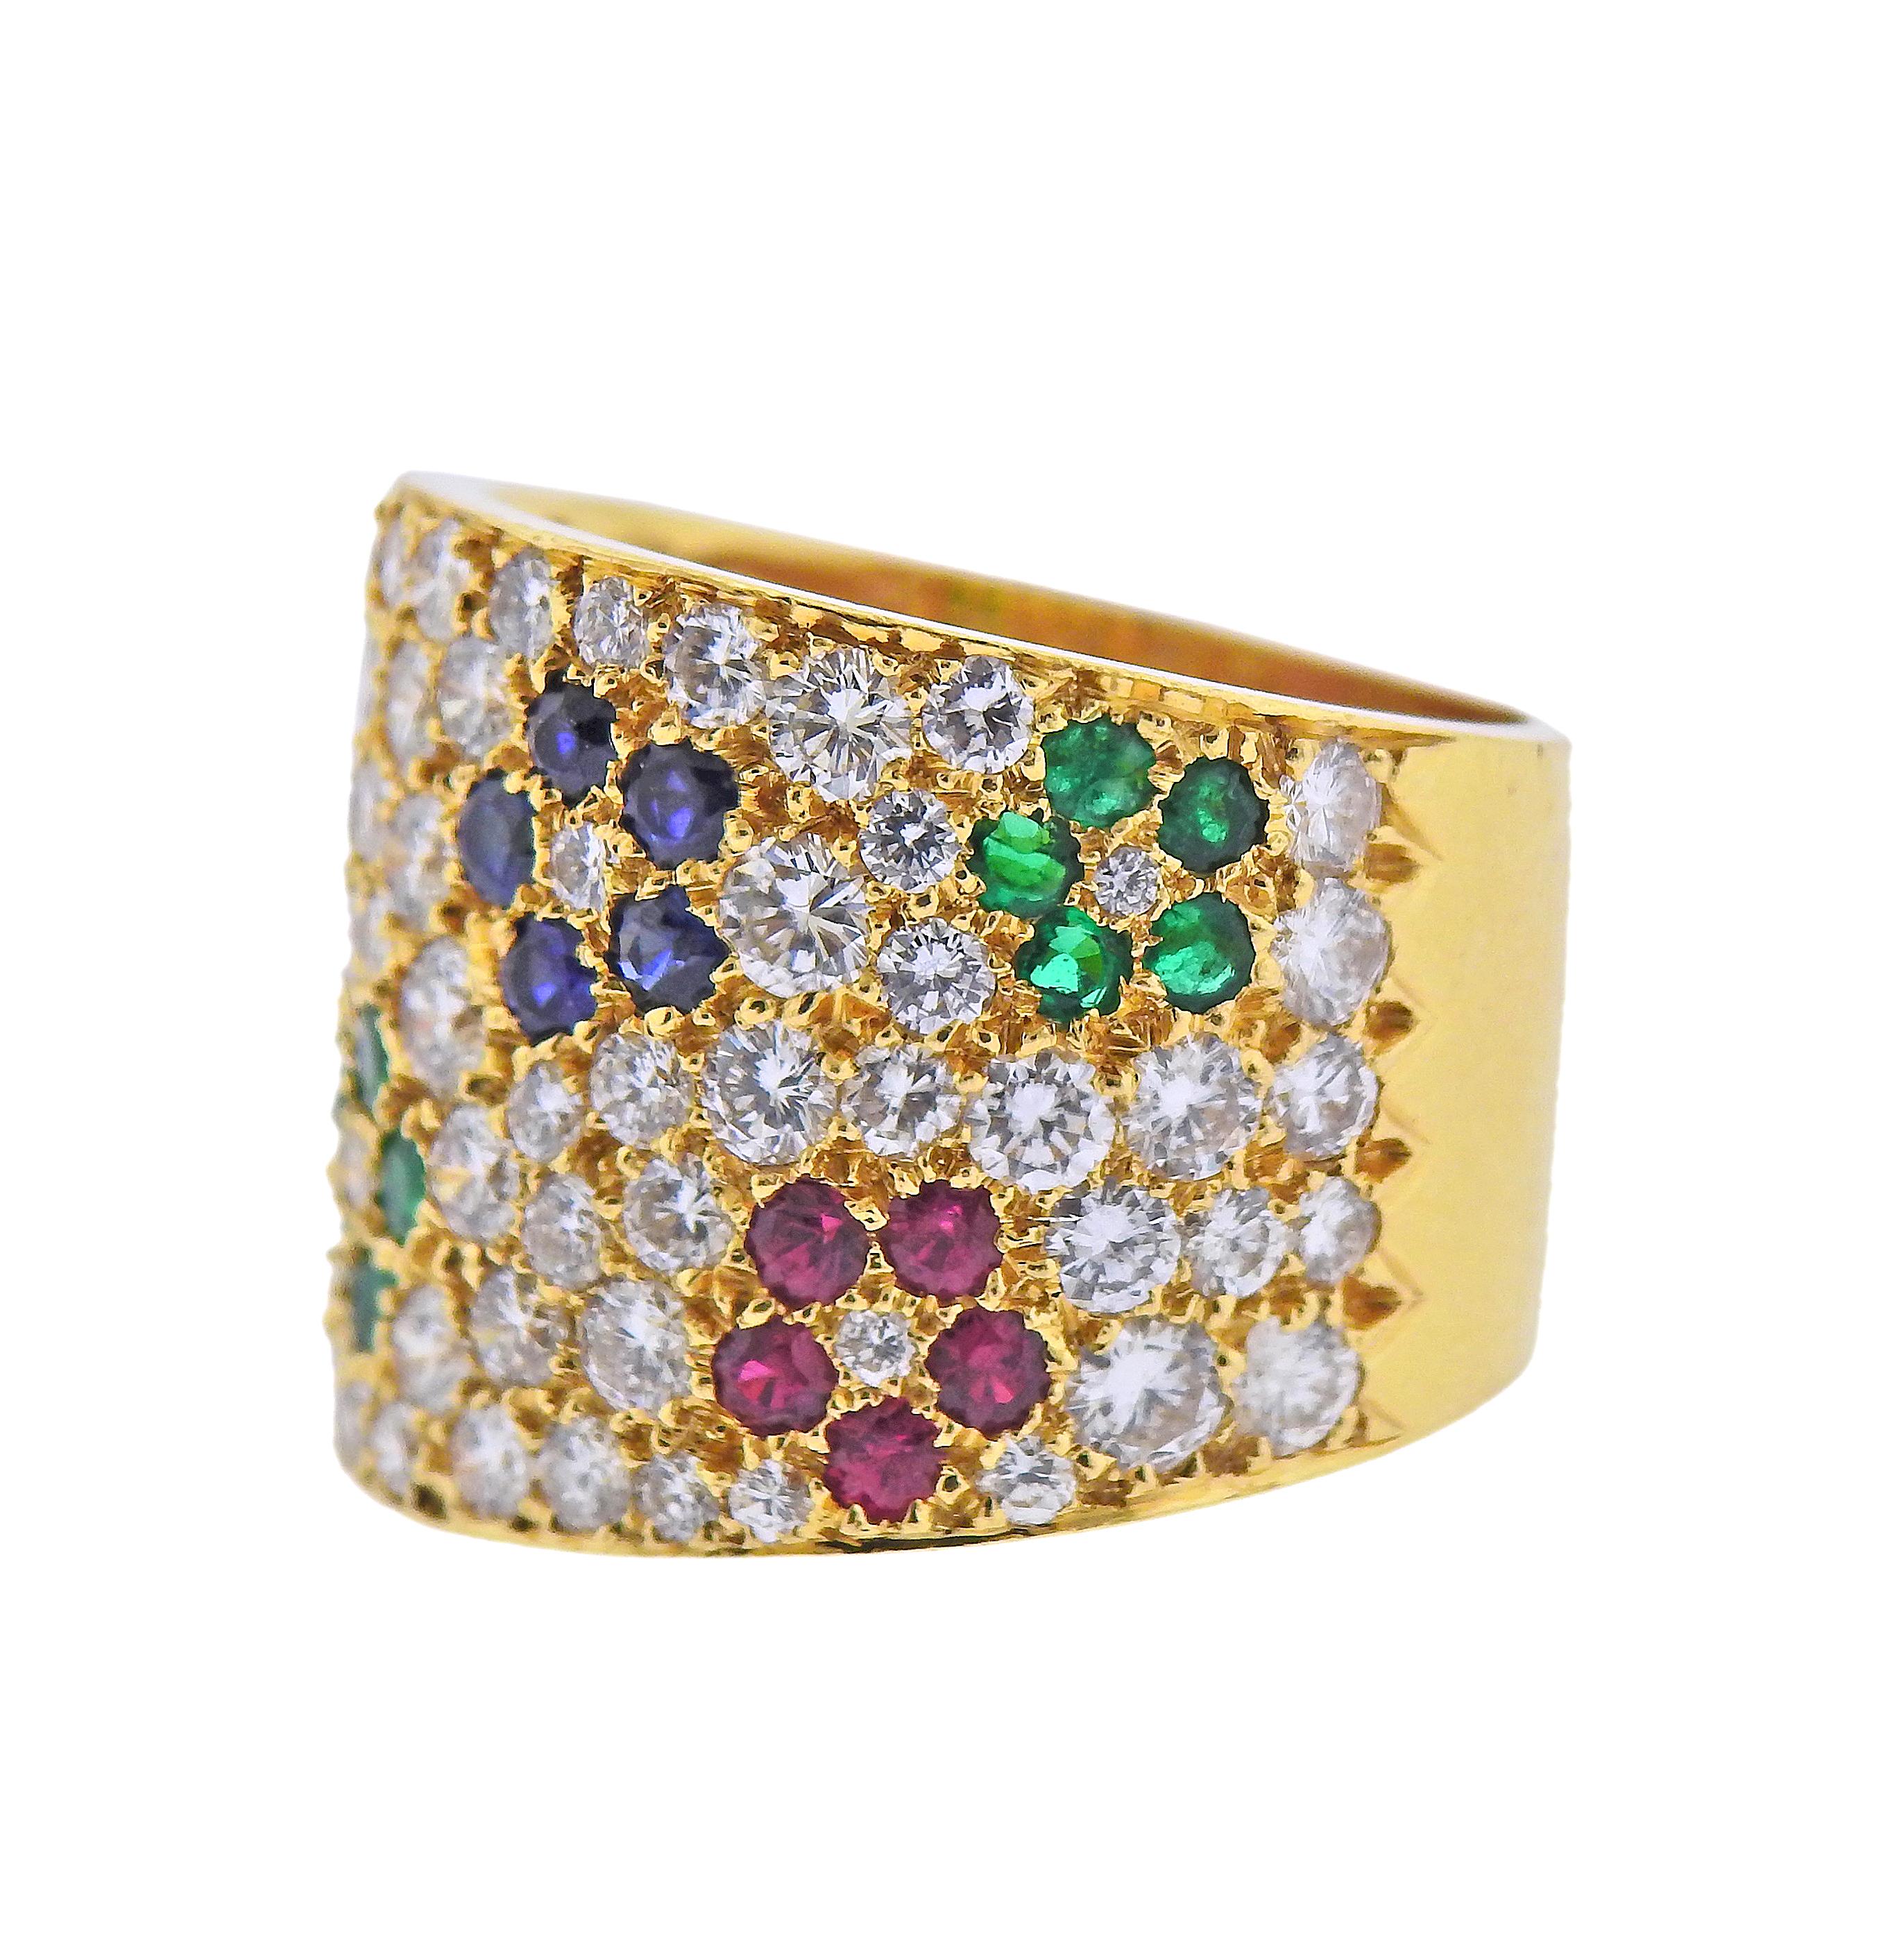 Impressive 18k yellow gold wide band ring by Van Cleef & Arpels, adorned with rubies, sapphires, emeralds flowers, and approx. 4.00ctw in diamonds. Ring size - 7.25, ring top is 18mm wide. Marked: Van Cleef Arpels, N 52742. Weight - 16.2 grams. 